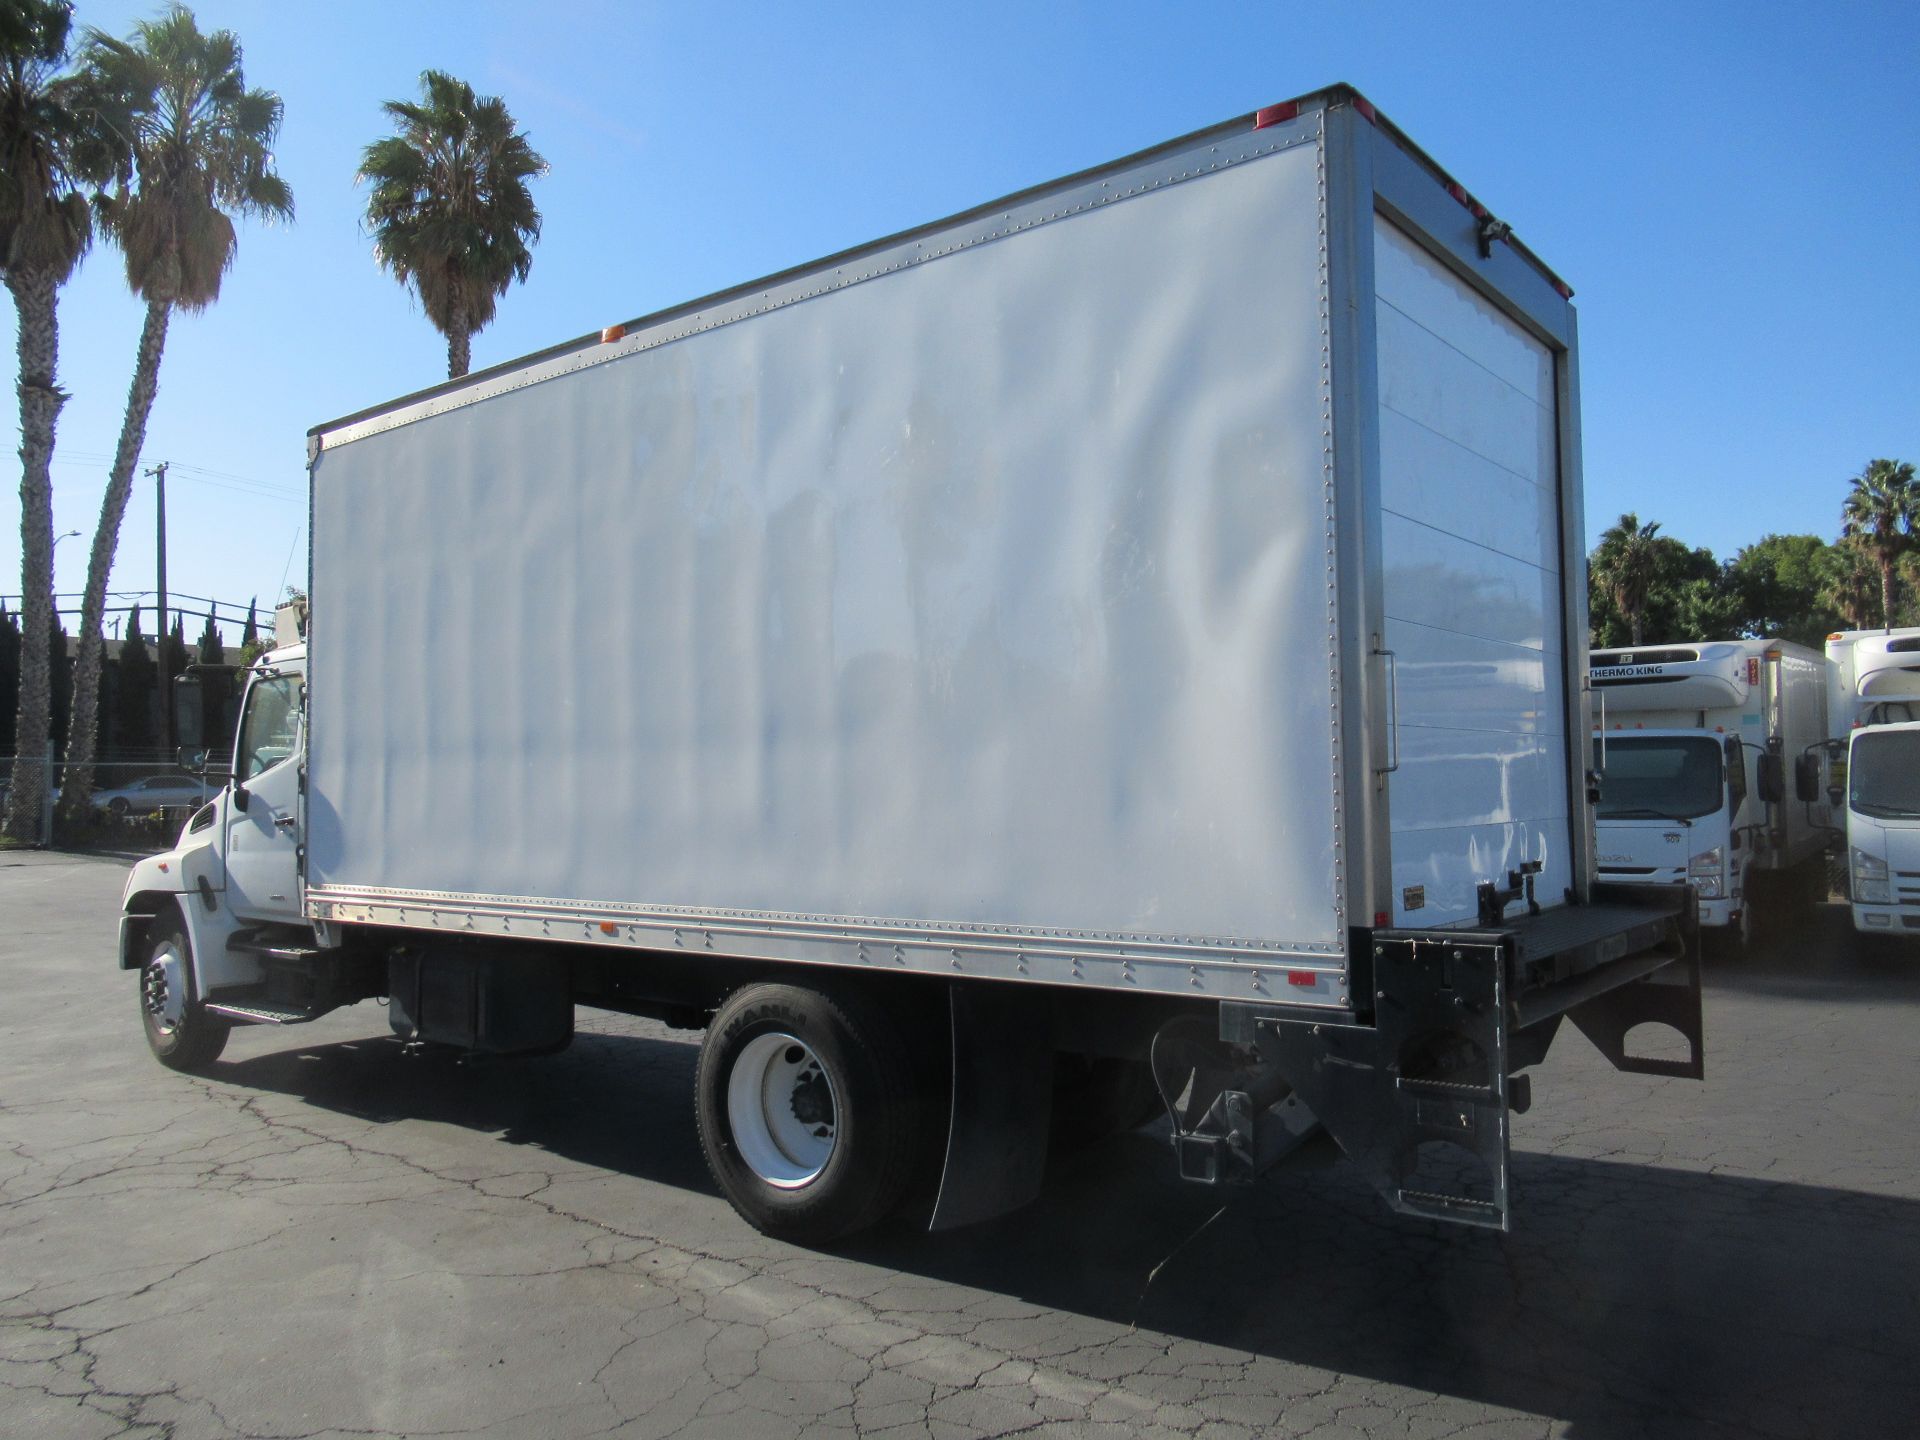 2007 Hino refrigerated truck - Image 4 of 12